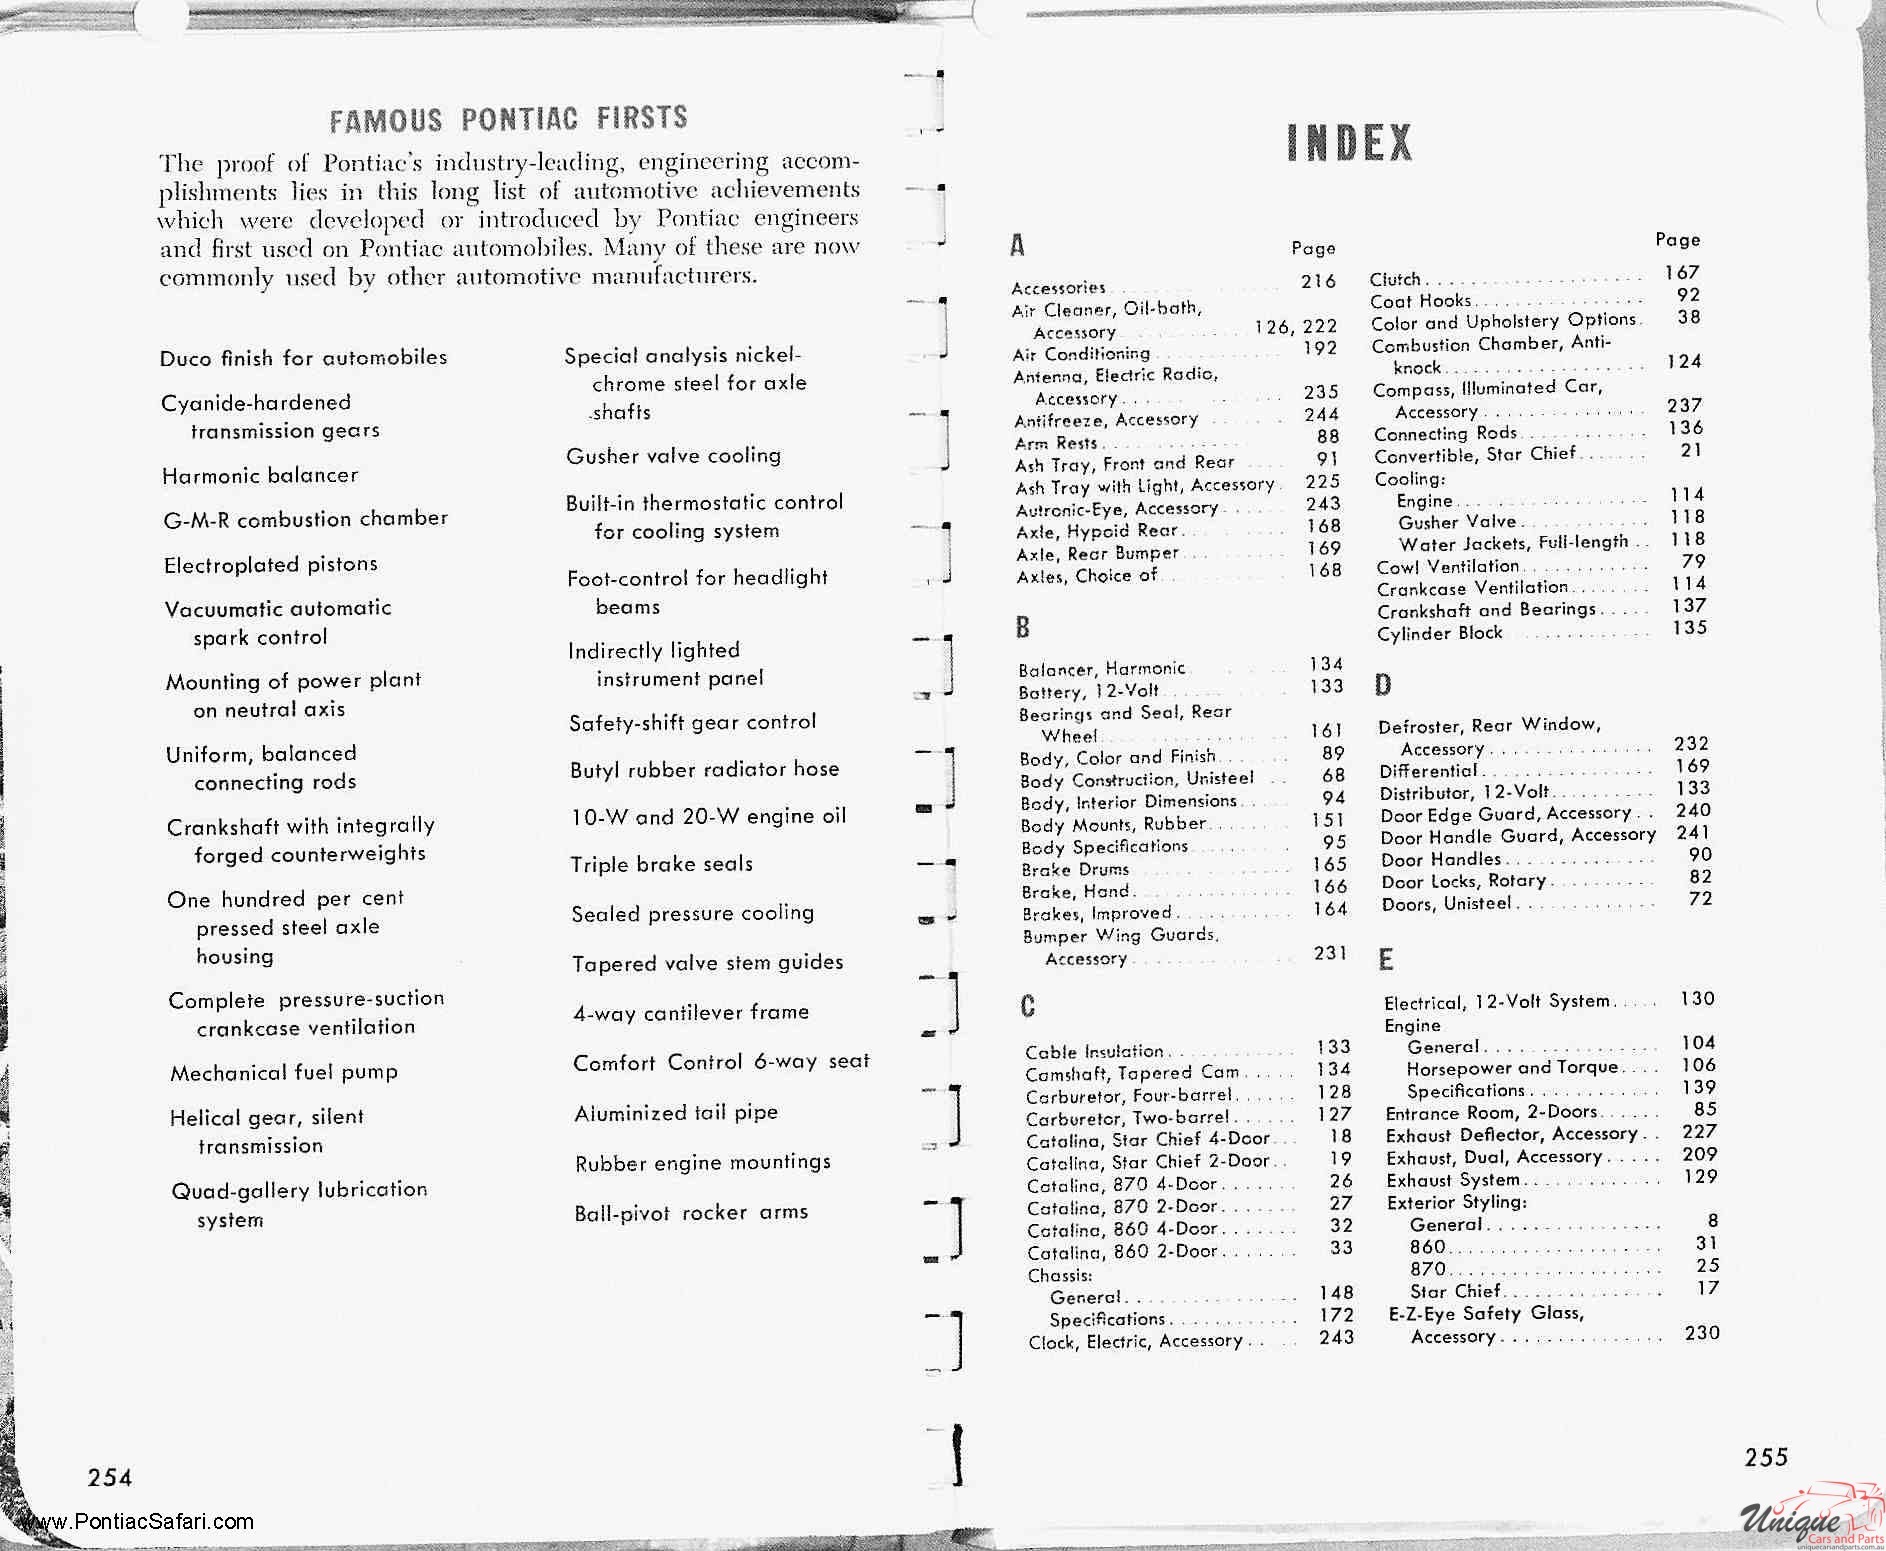 1956 Pontiac Facts Book Page 111